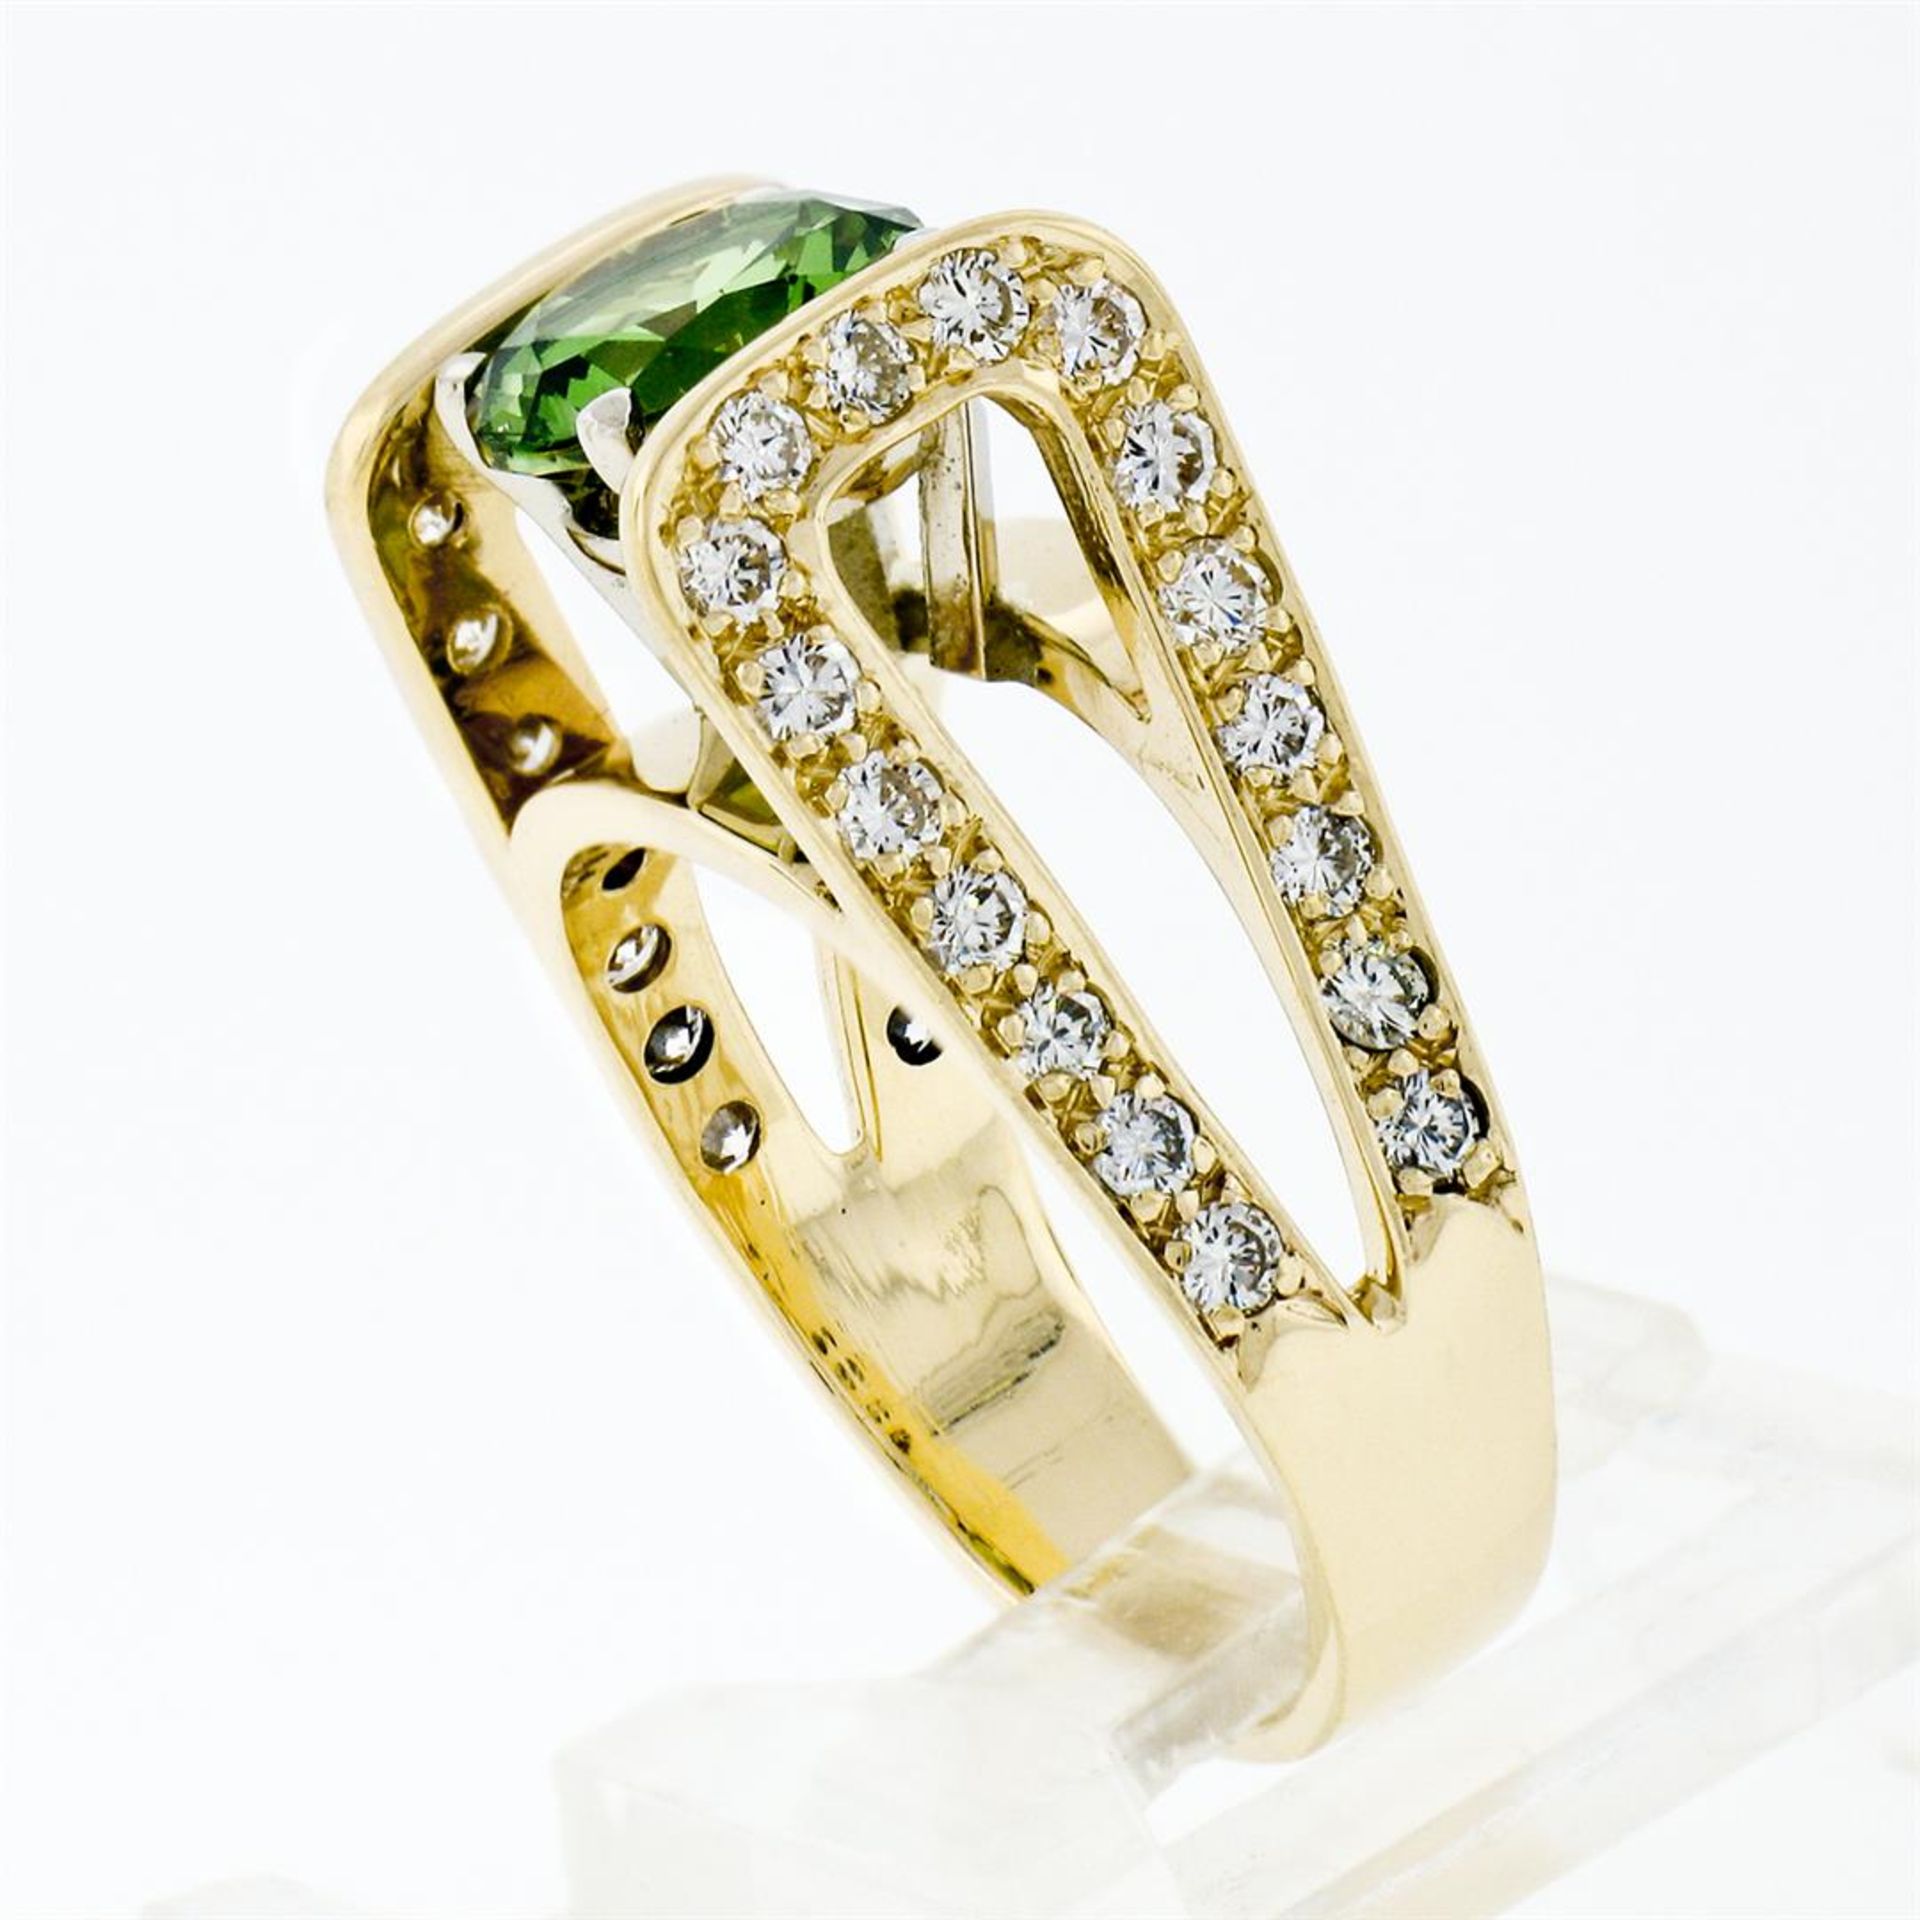 14k Yellow Gold 3.0ctw Round Peridot Solitaire & Ideal Cut Diamond Cocktail Ring - Image 5 of 9